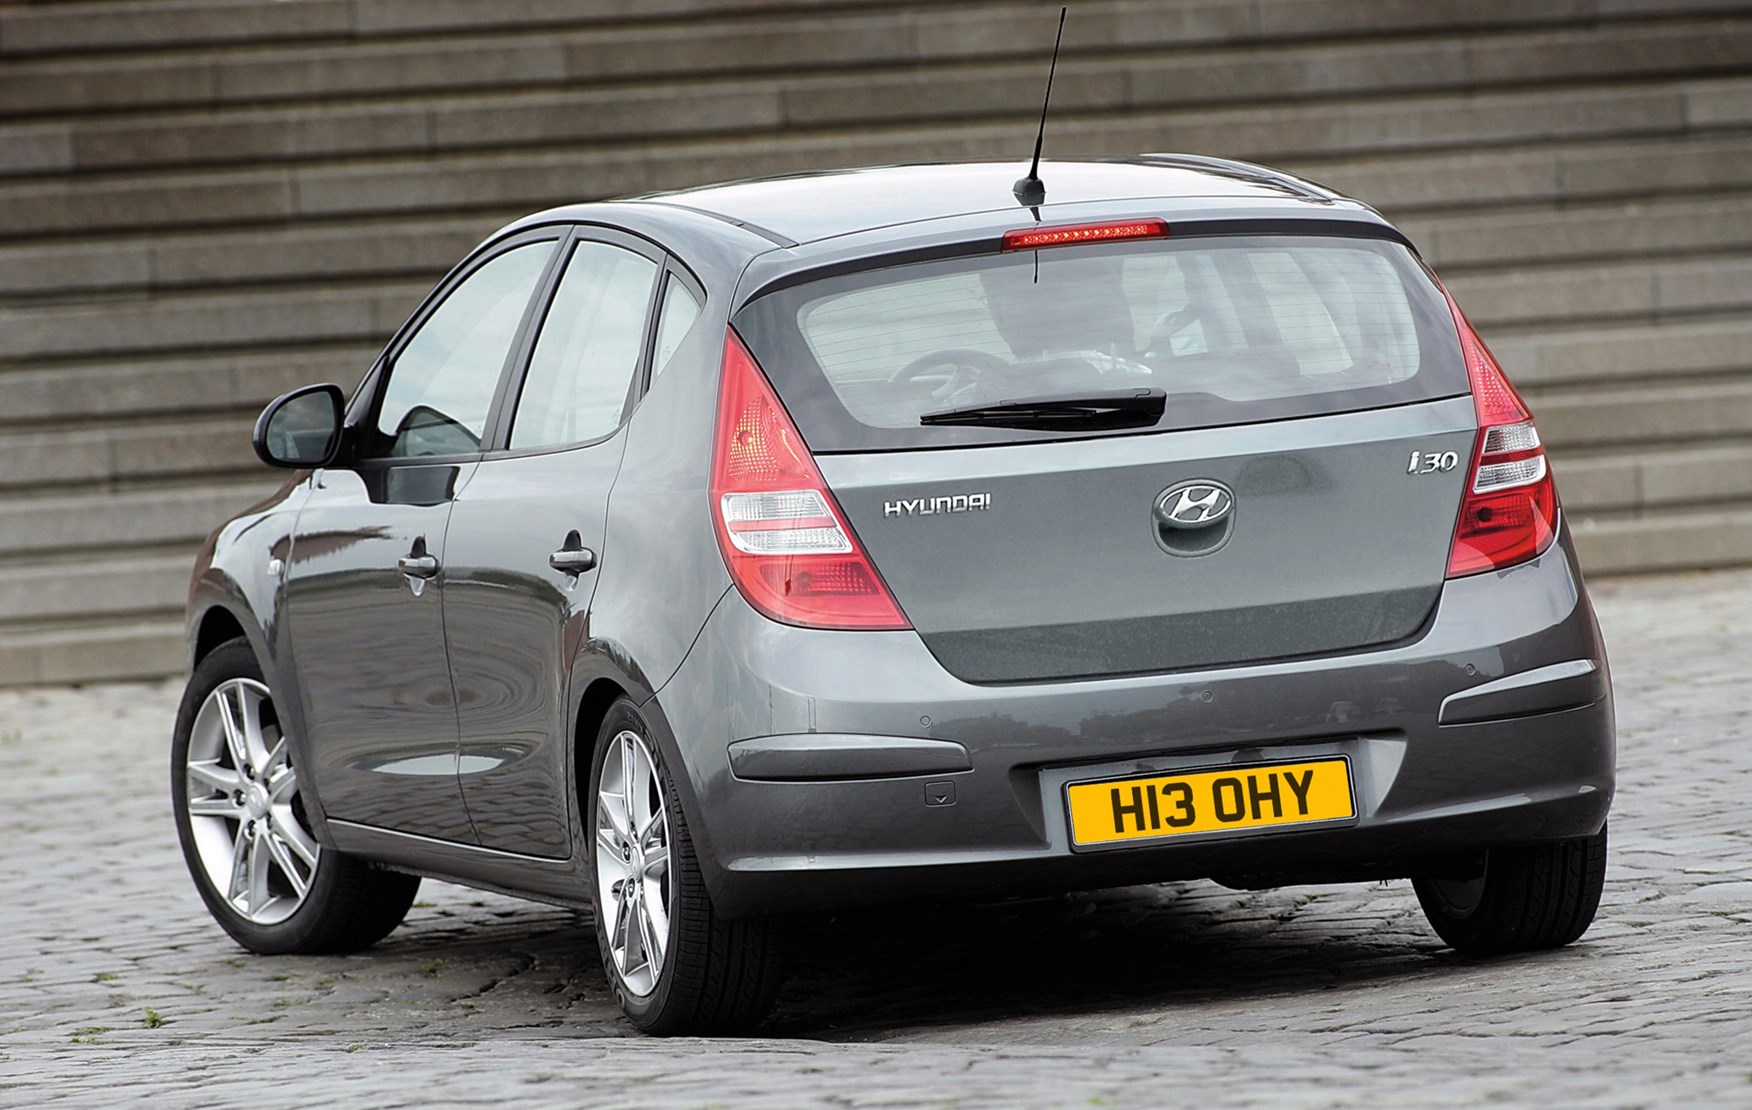 Used Hyundai I30 Hatchback 07 11 Review Parkers